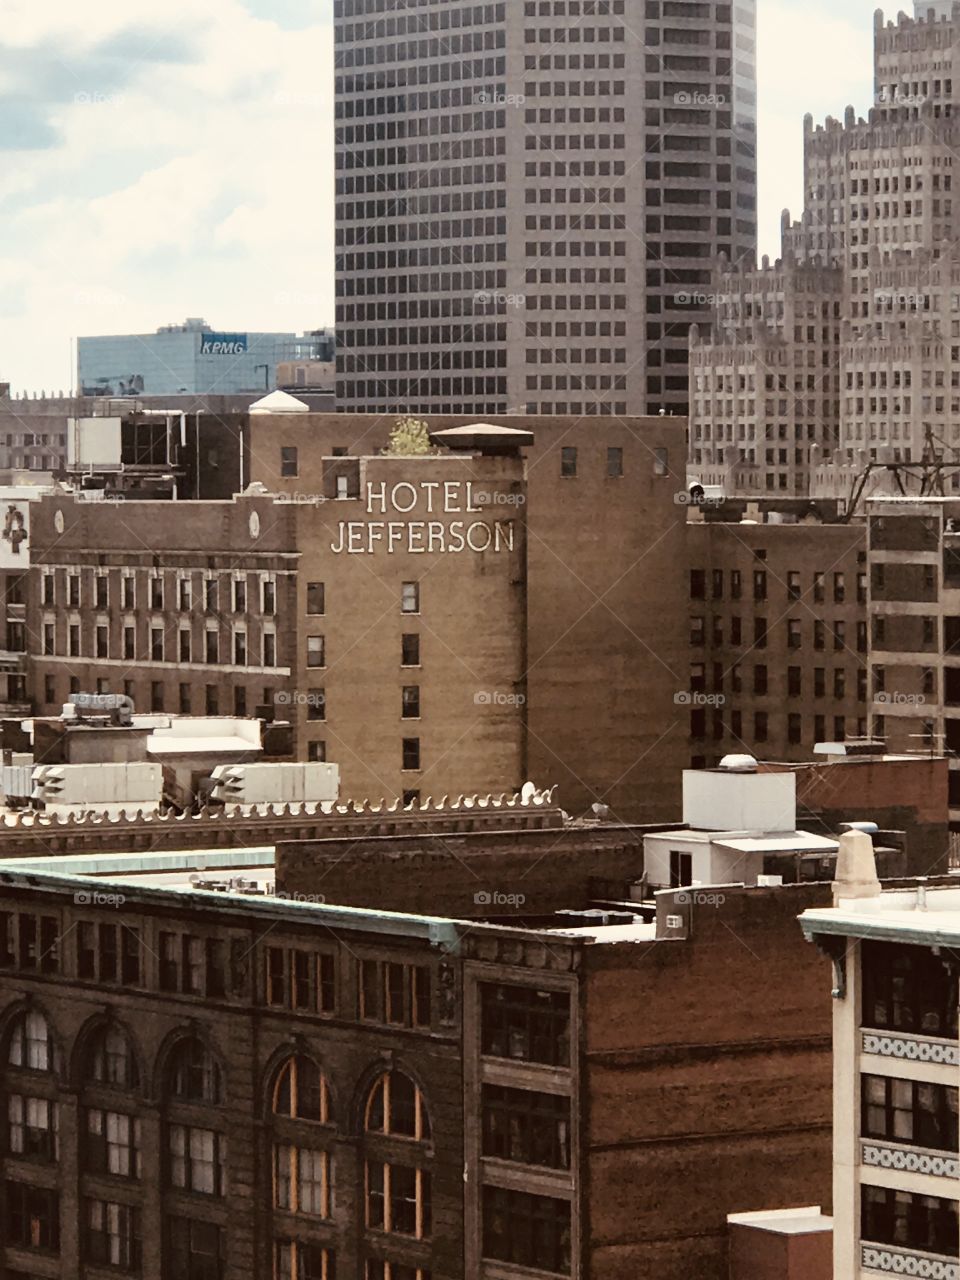 St. Louis has a lot of cool vintage looking hotels like this one spotted from a rooftop 